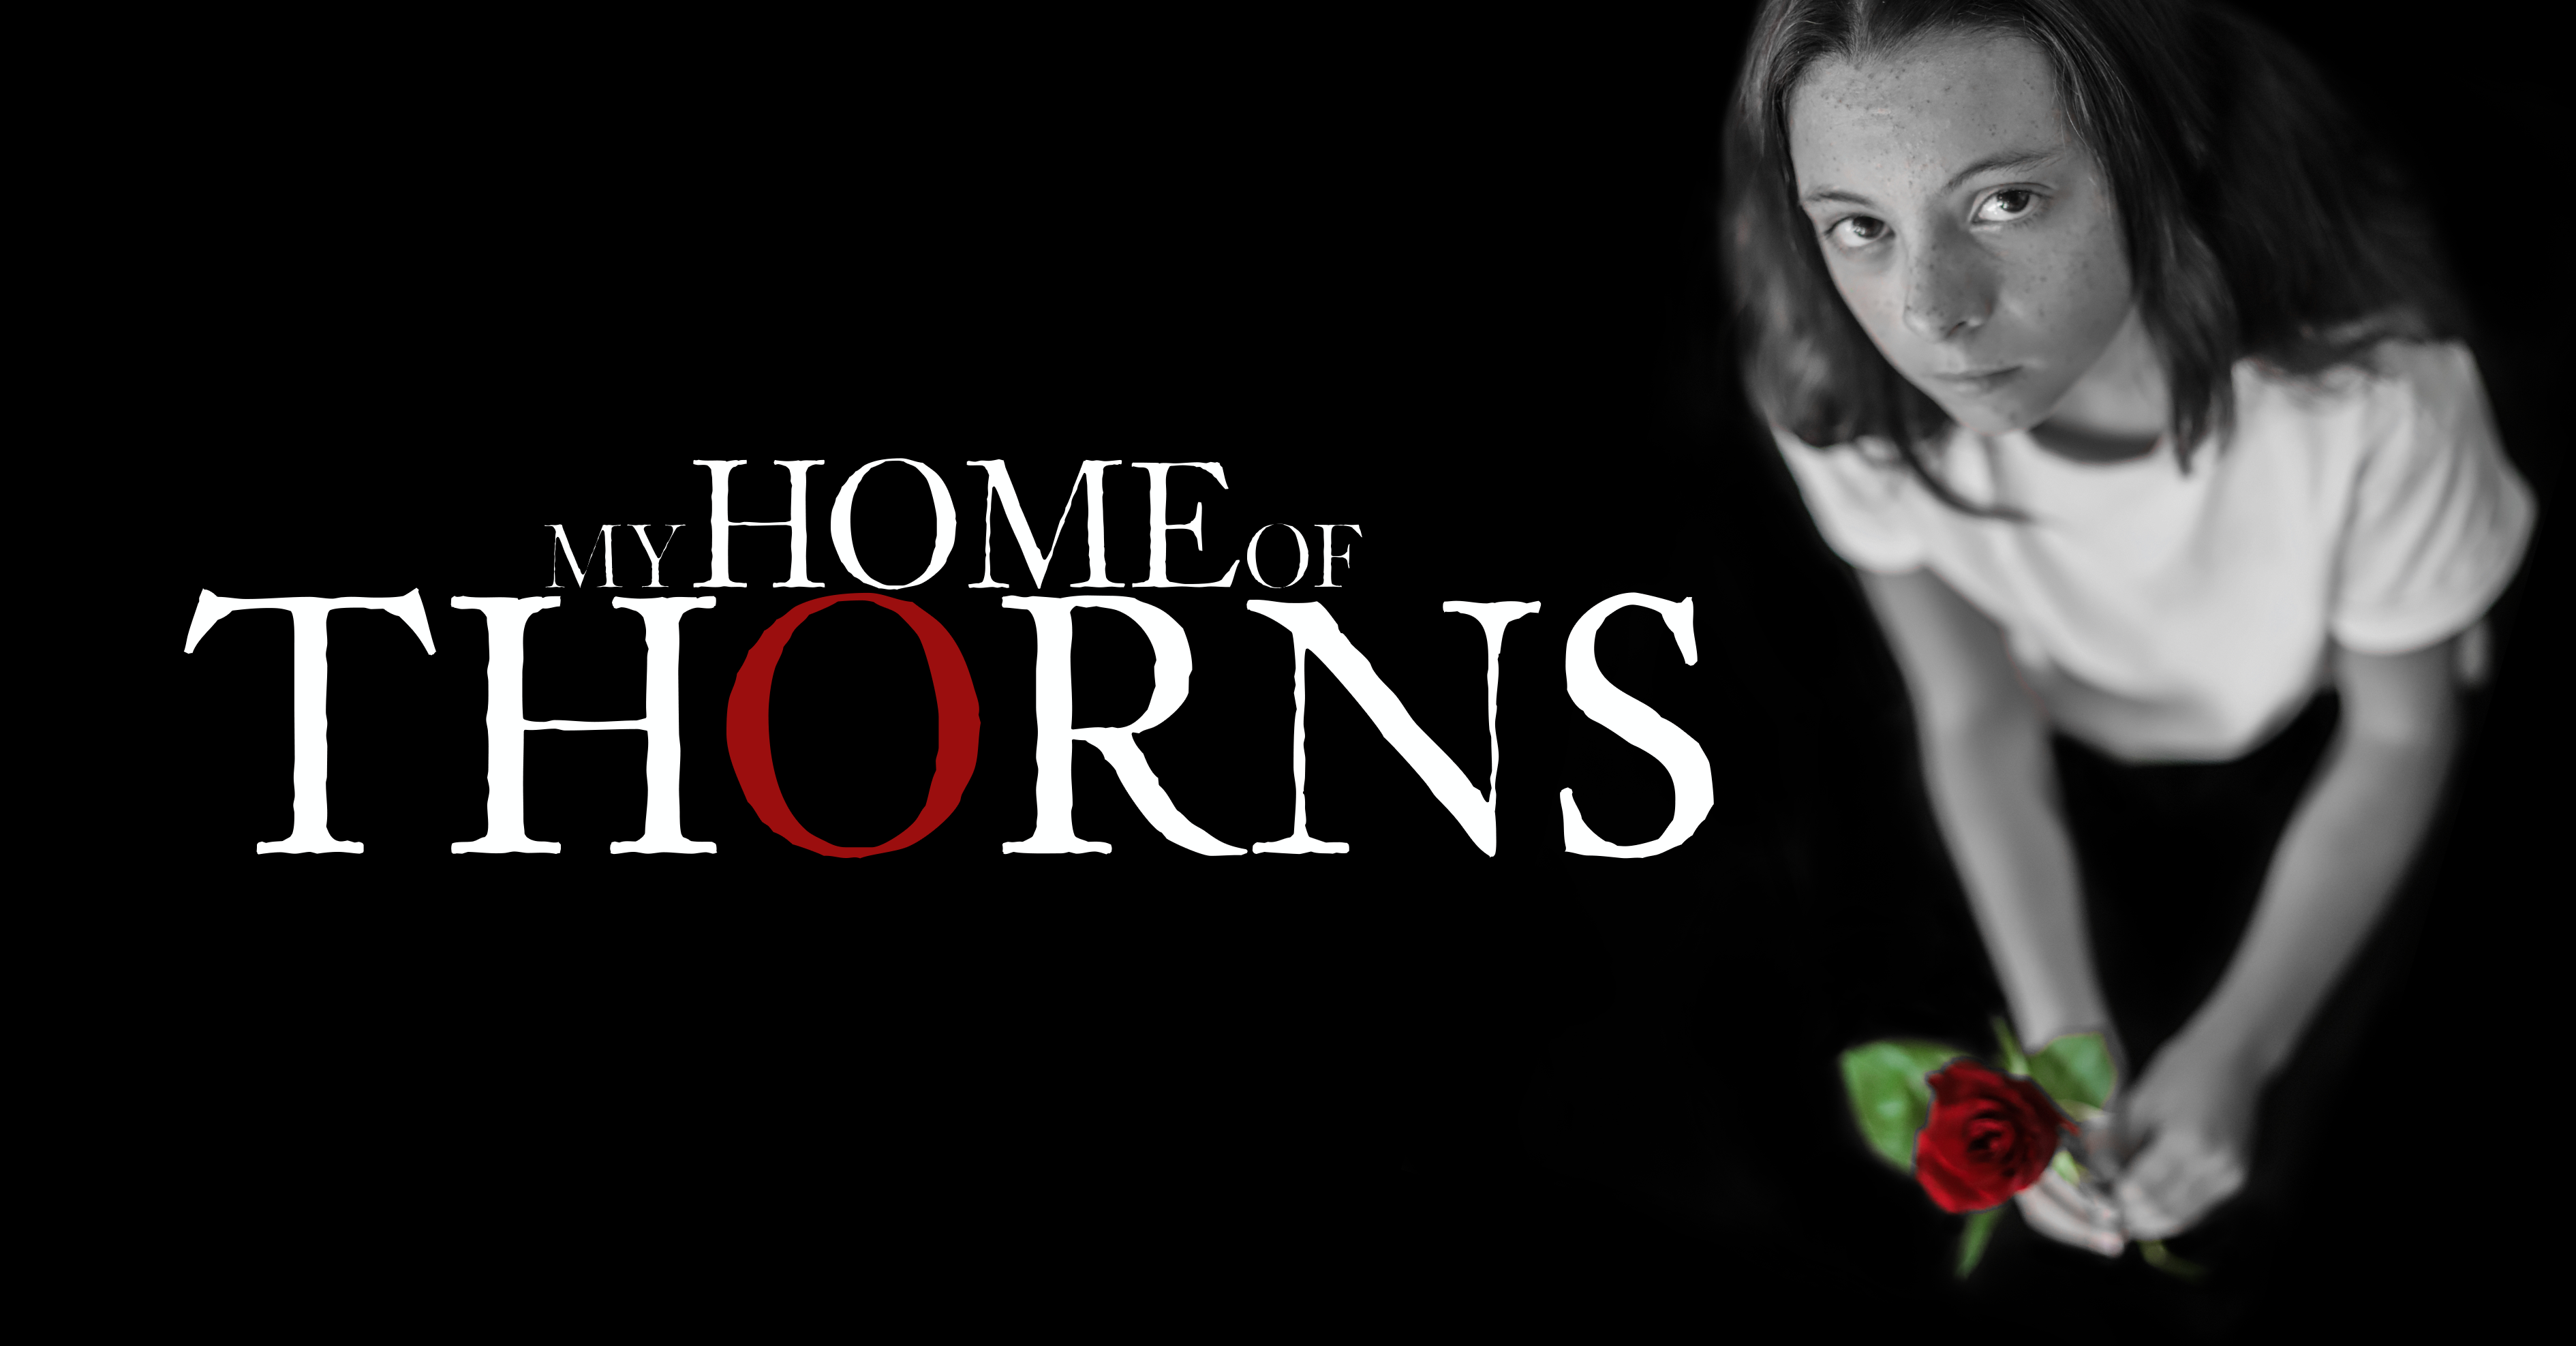 MY HOME OF THORNS